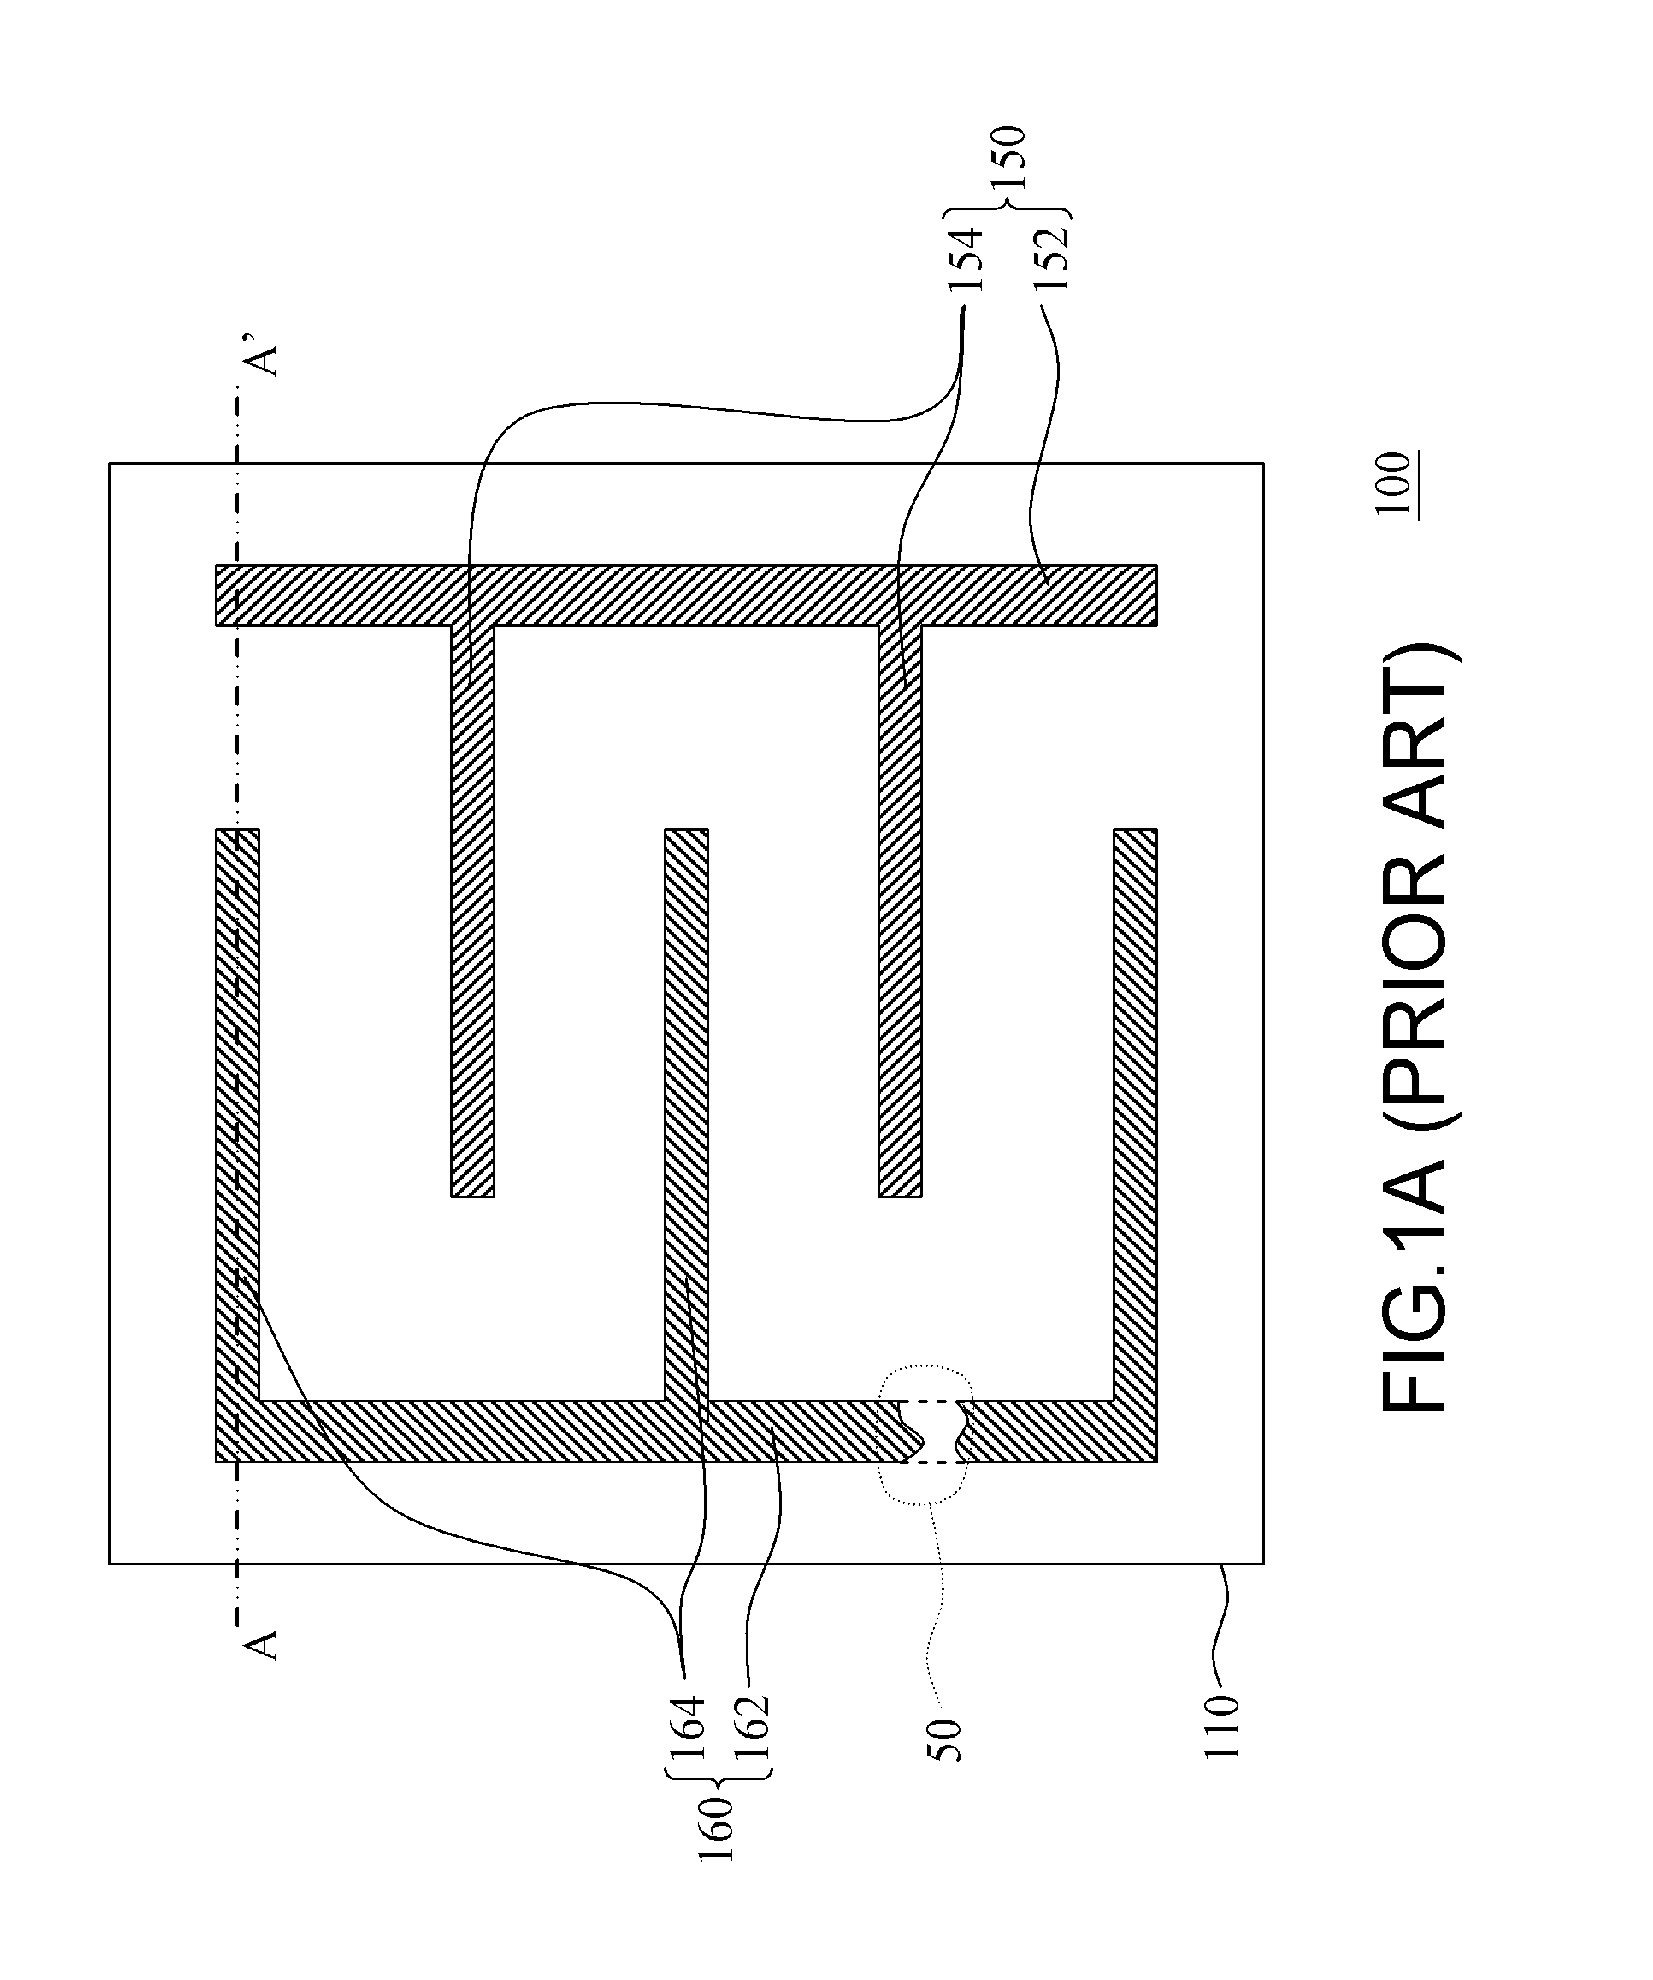 Light emitting diode chip with double close-loop electrode design